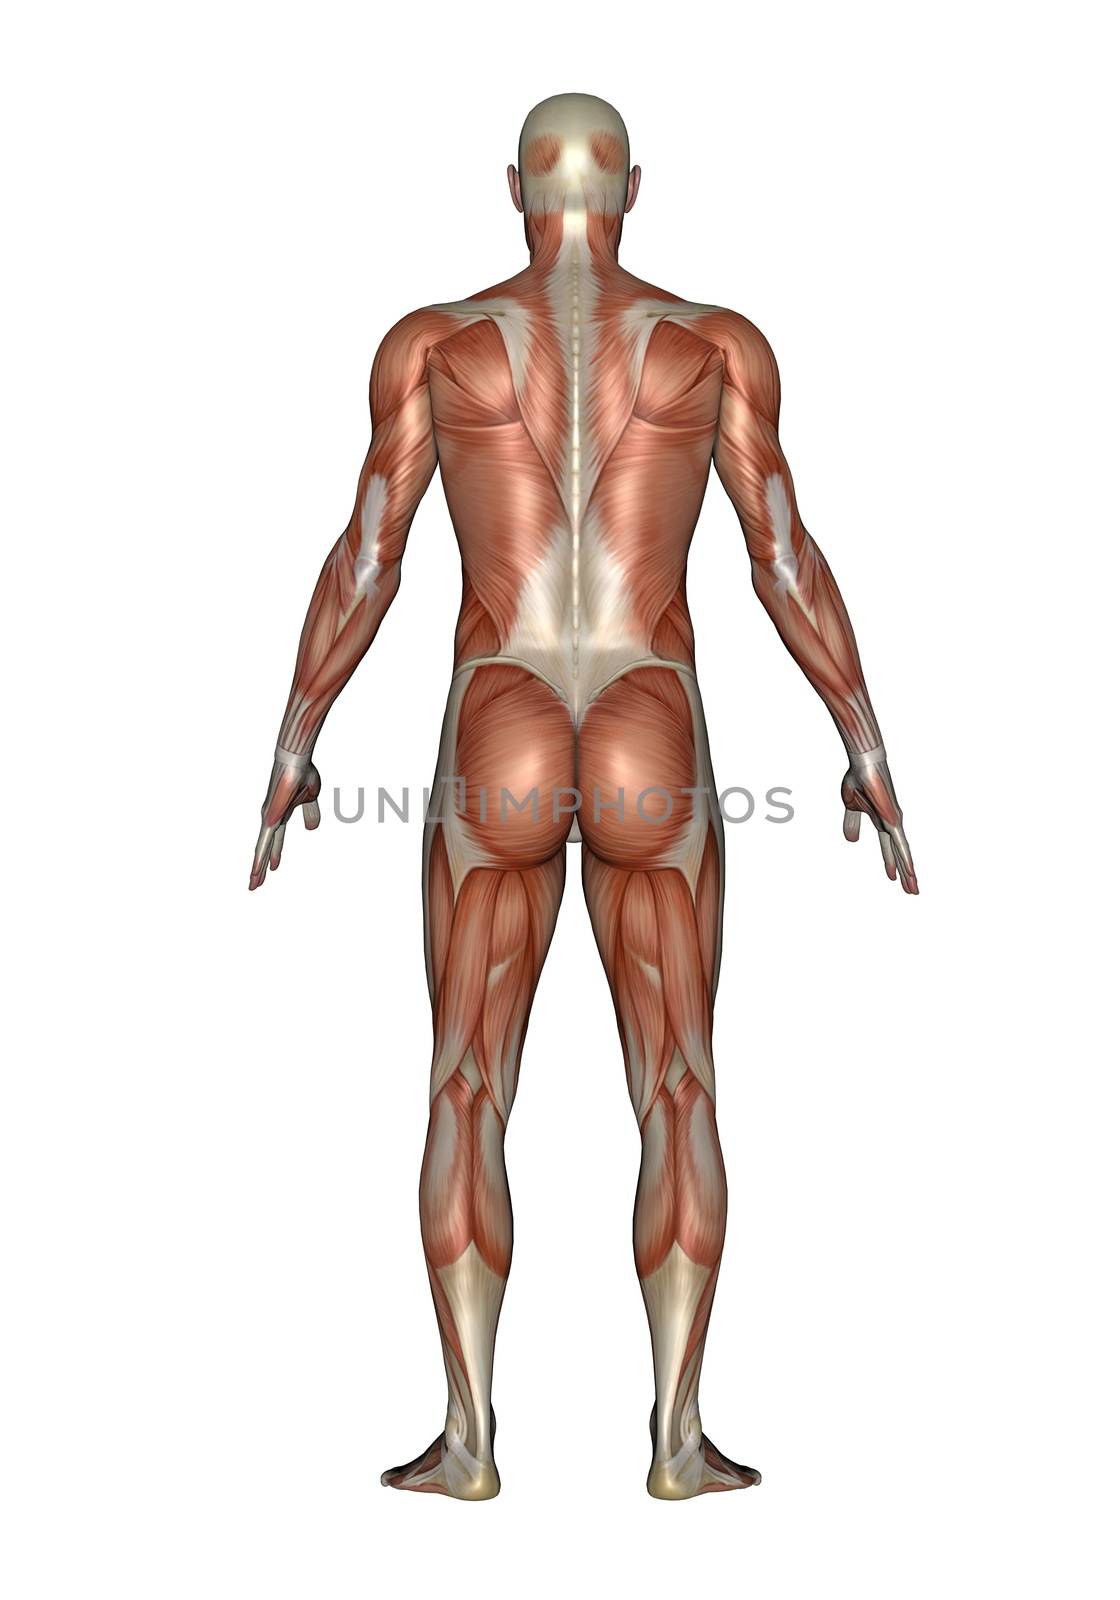 Realistic back muscles of man isolated in white background